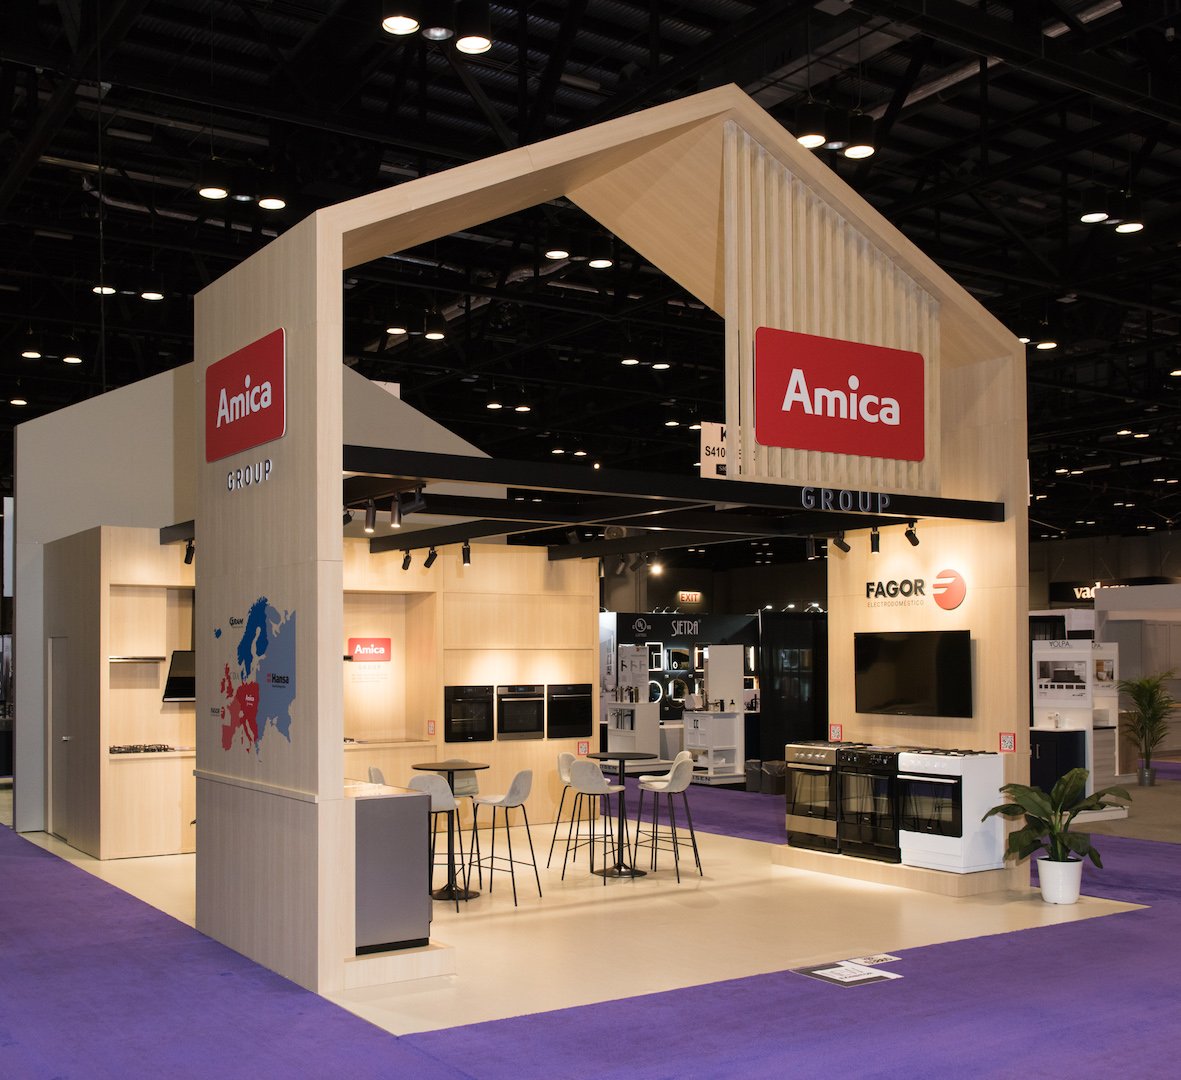 Trade Show Displays - Unlimited Opportunities Await